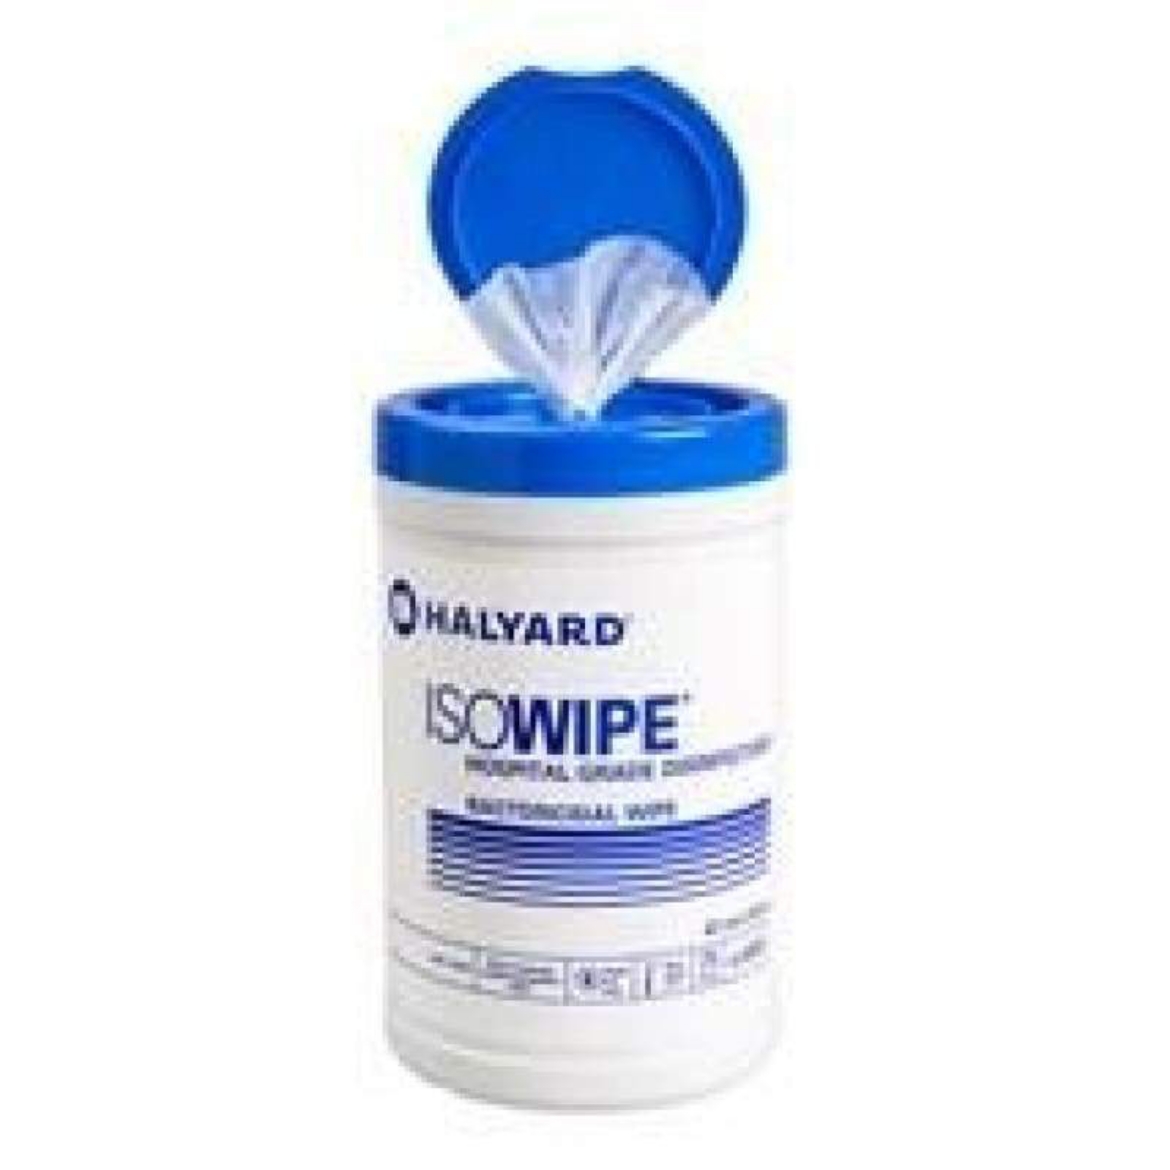 Picture of Halyard ISOWIPE Isopropyl Bactericidal Wipe (75 per Cannister, 12 Cannisters per ctn)